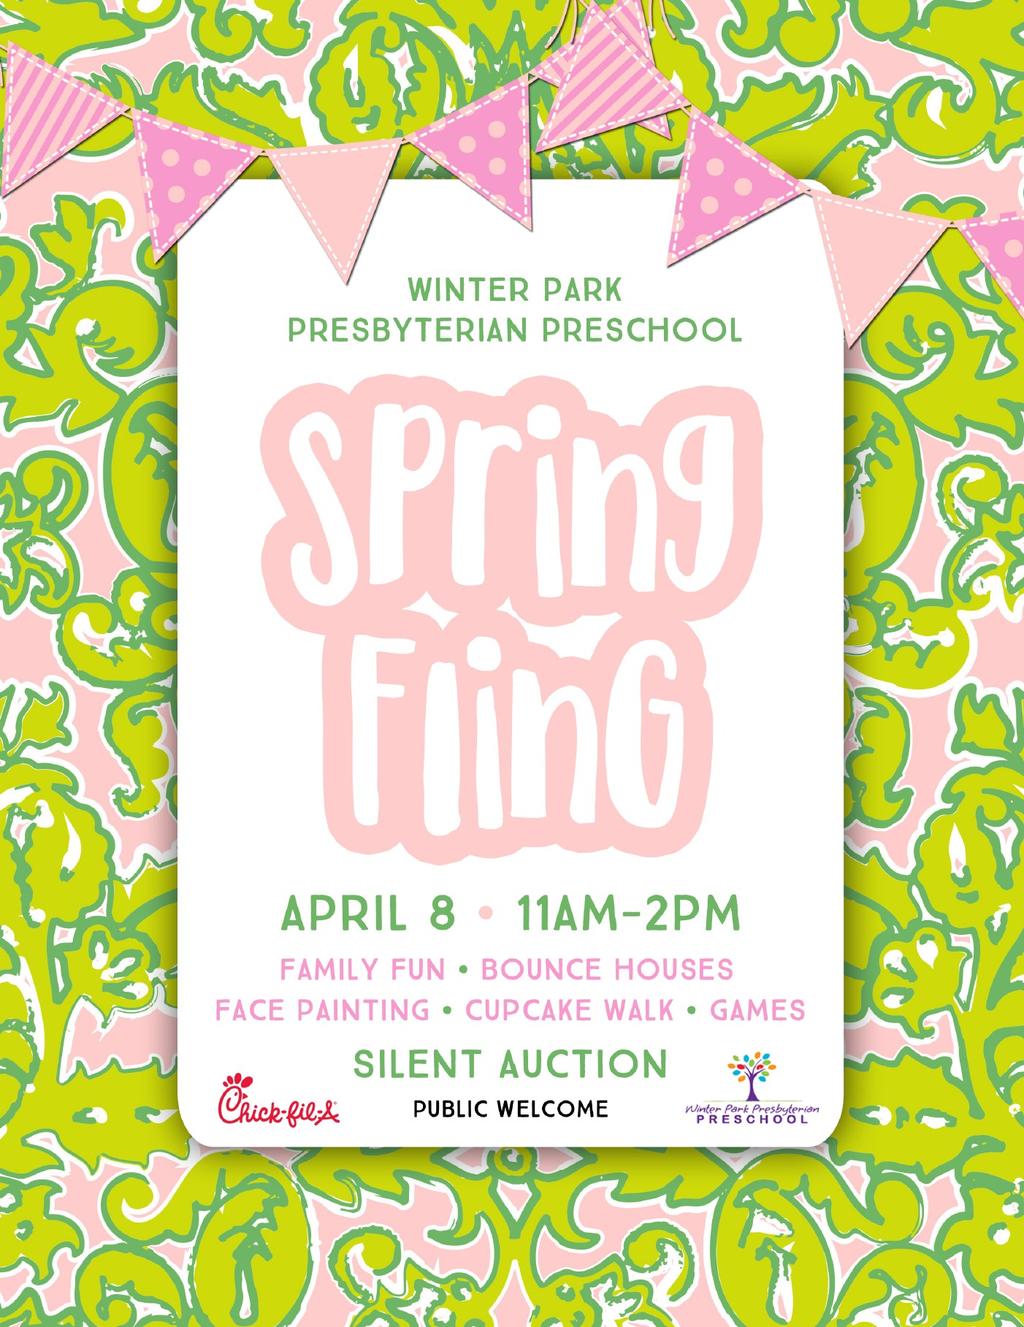 9 Spring Fling & Silent Auction Join us for this year s Preschool Spring Fling and Silent Auction. The event will be held this Saturday, April 8 from 